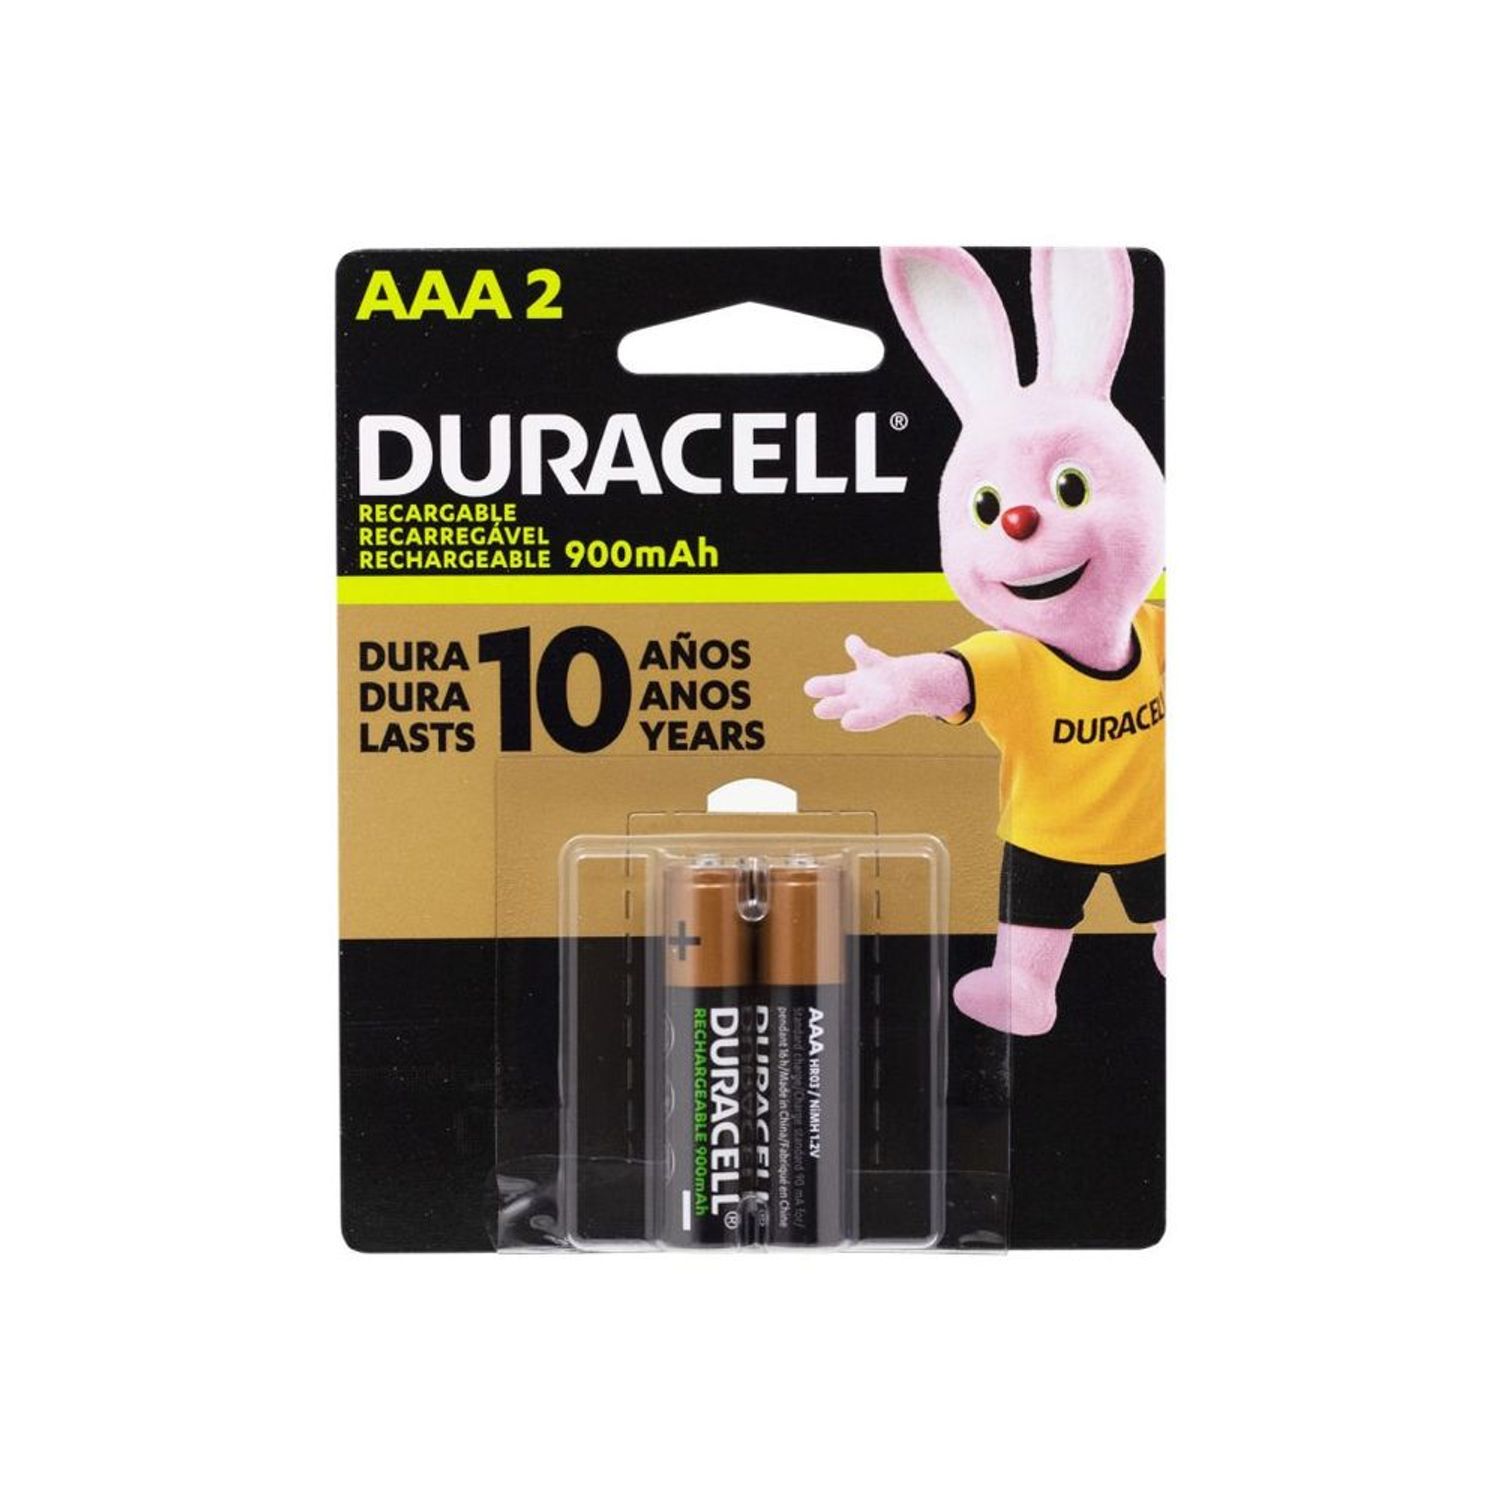 Papereria Consumibles Menorca - Can Migue  PILA DURACELL RECARGABLE  STAYCHARGED AAA 900 MAH BLISTER DE 4 UNIDADES